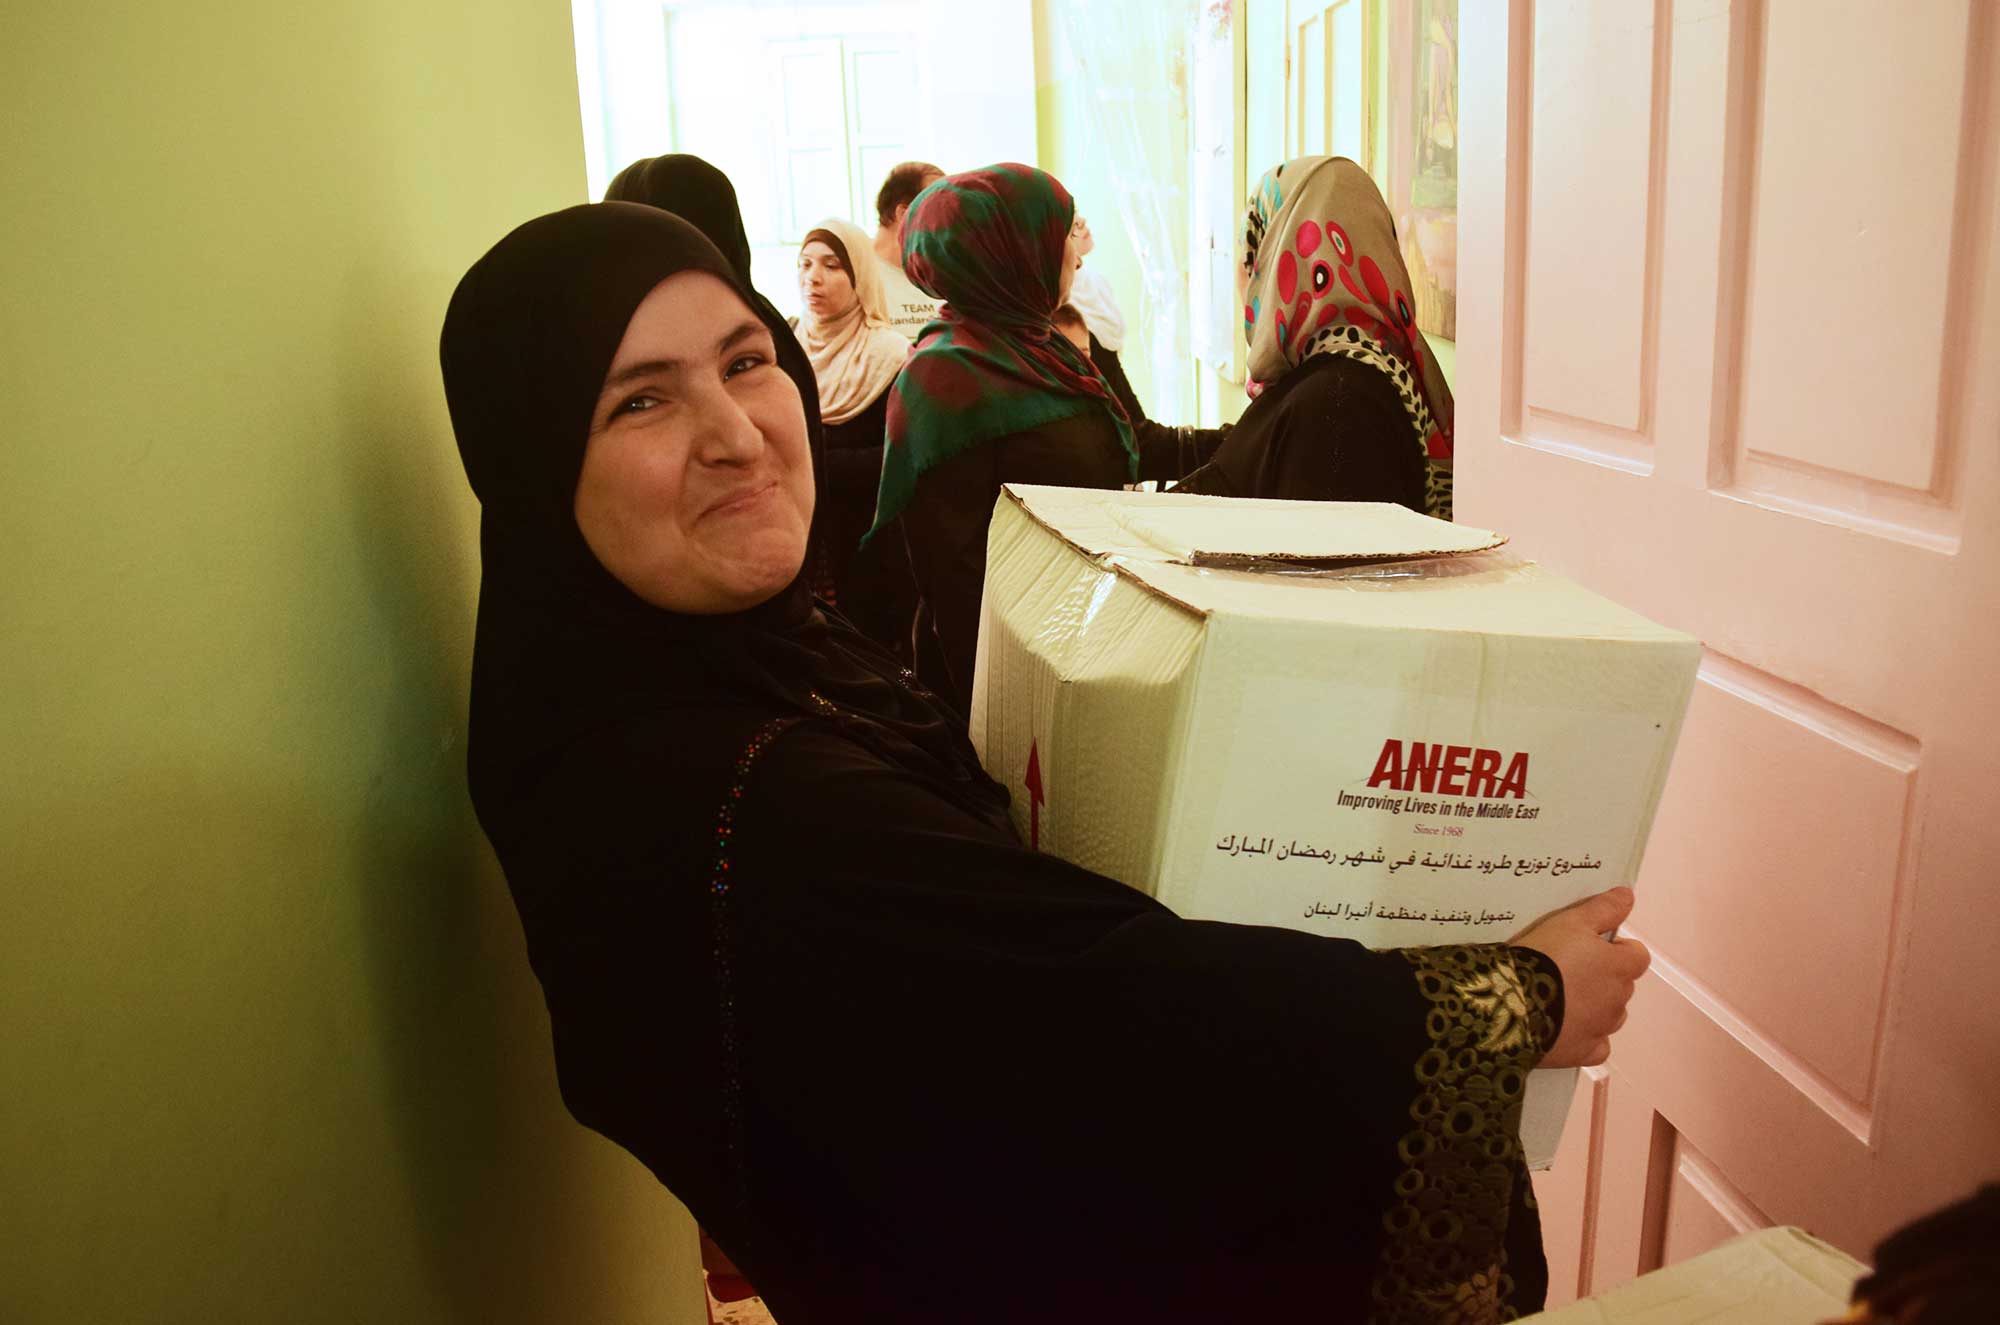 Maryam takes home an Anera food package that will help feed her family during Ramadan.